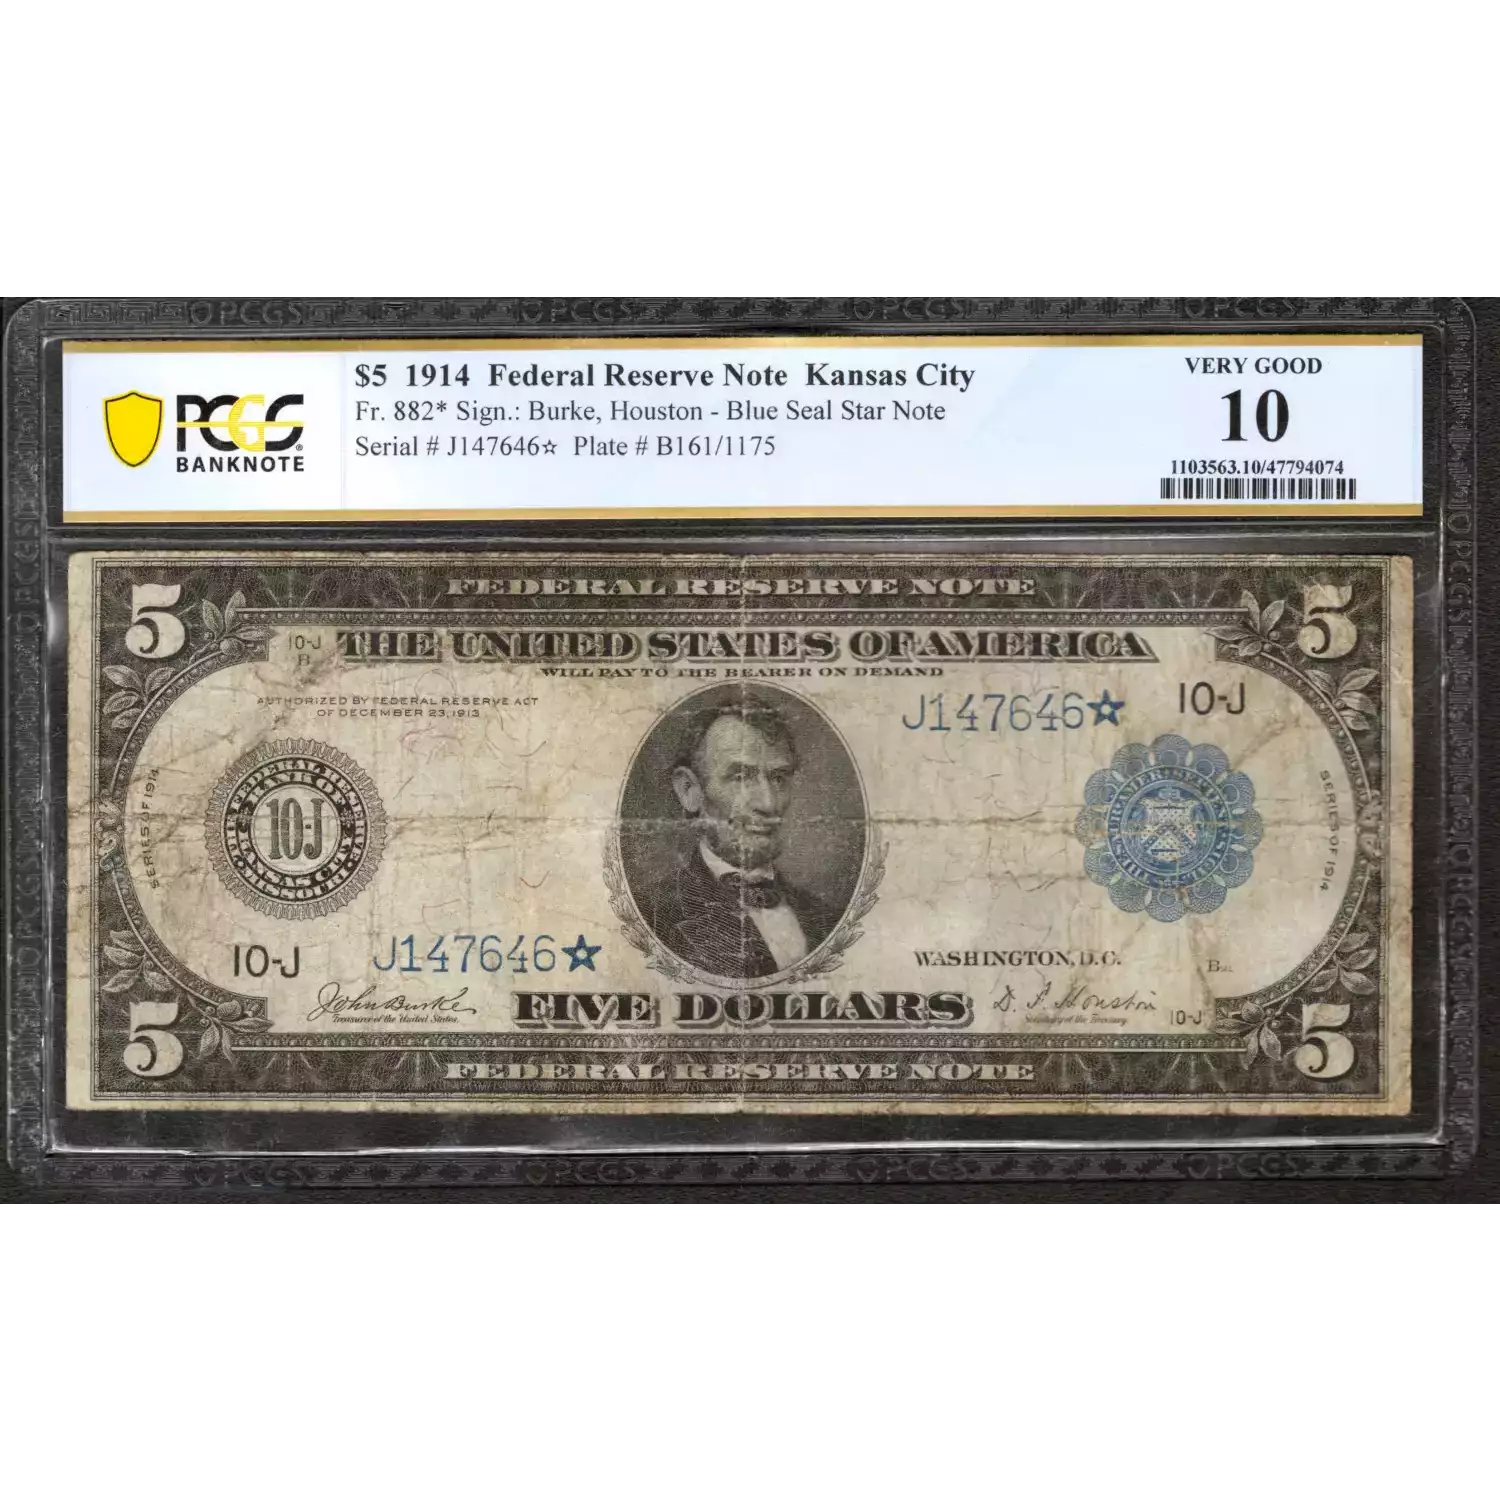 $5 1914 Red Seal Federal Reserve Notes 882*